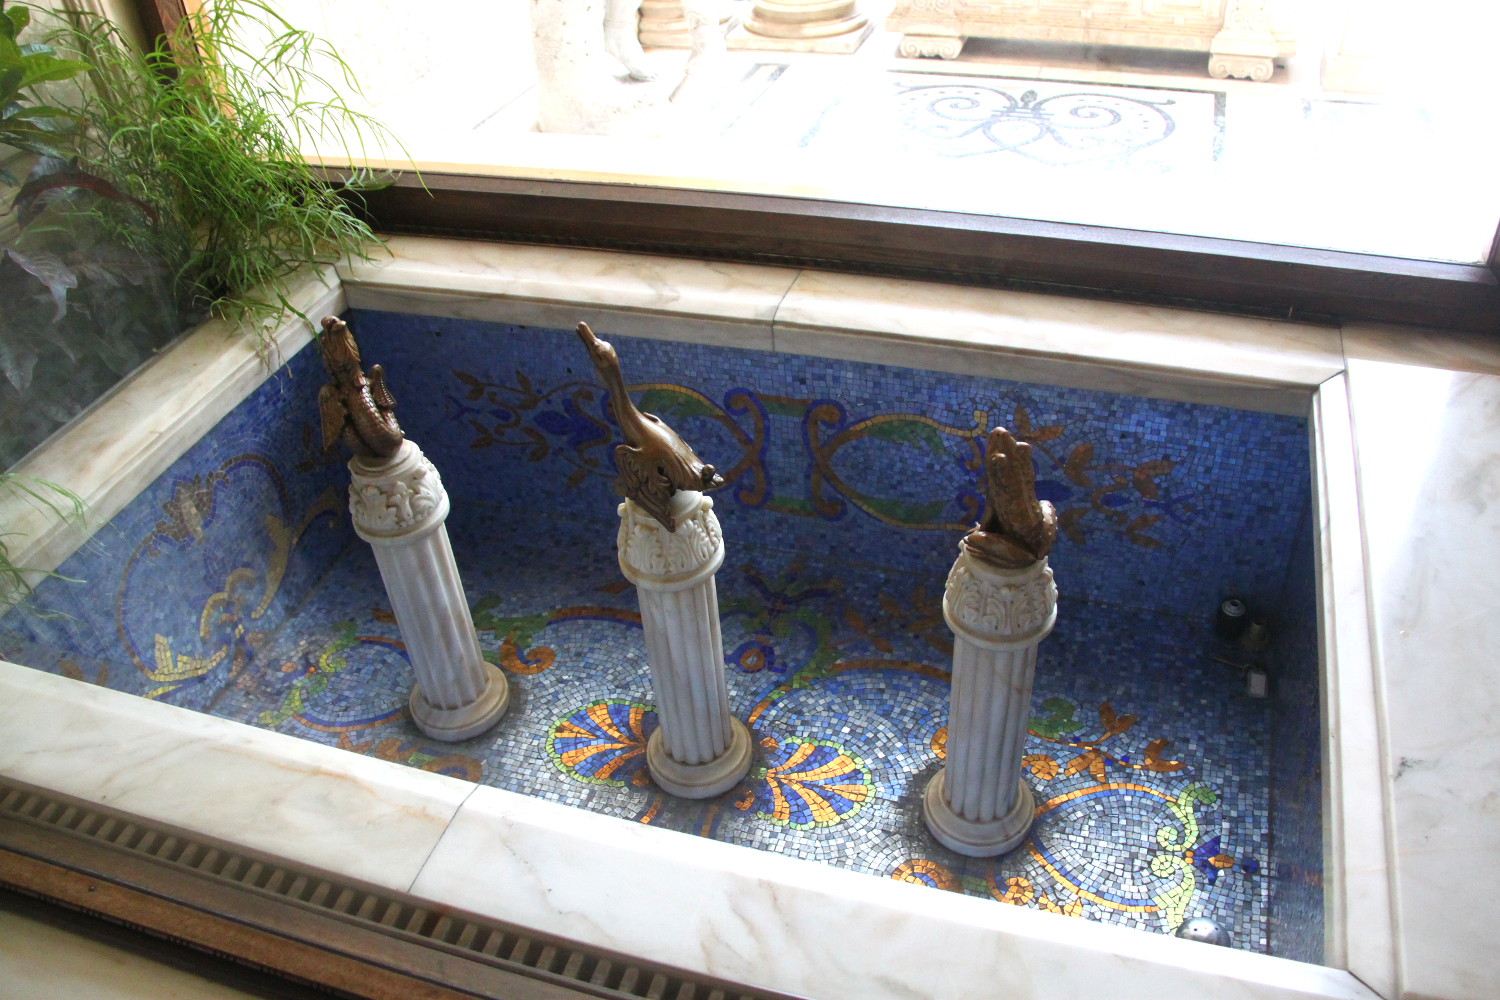 Primaverii (Spring) Palace, Ceausescu’s private residence - small fountains - there are numerous in the house!